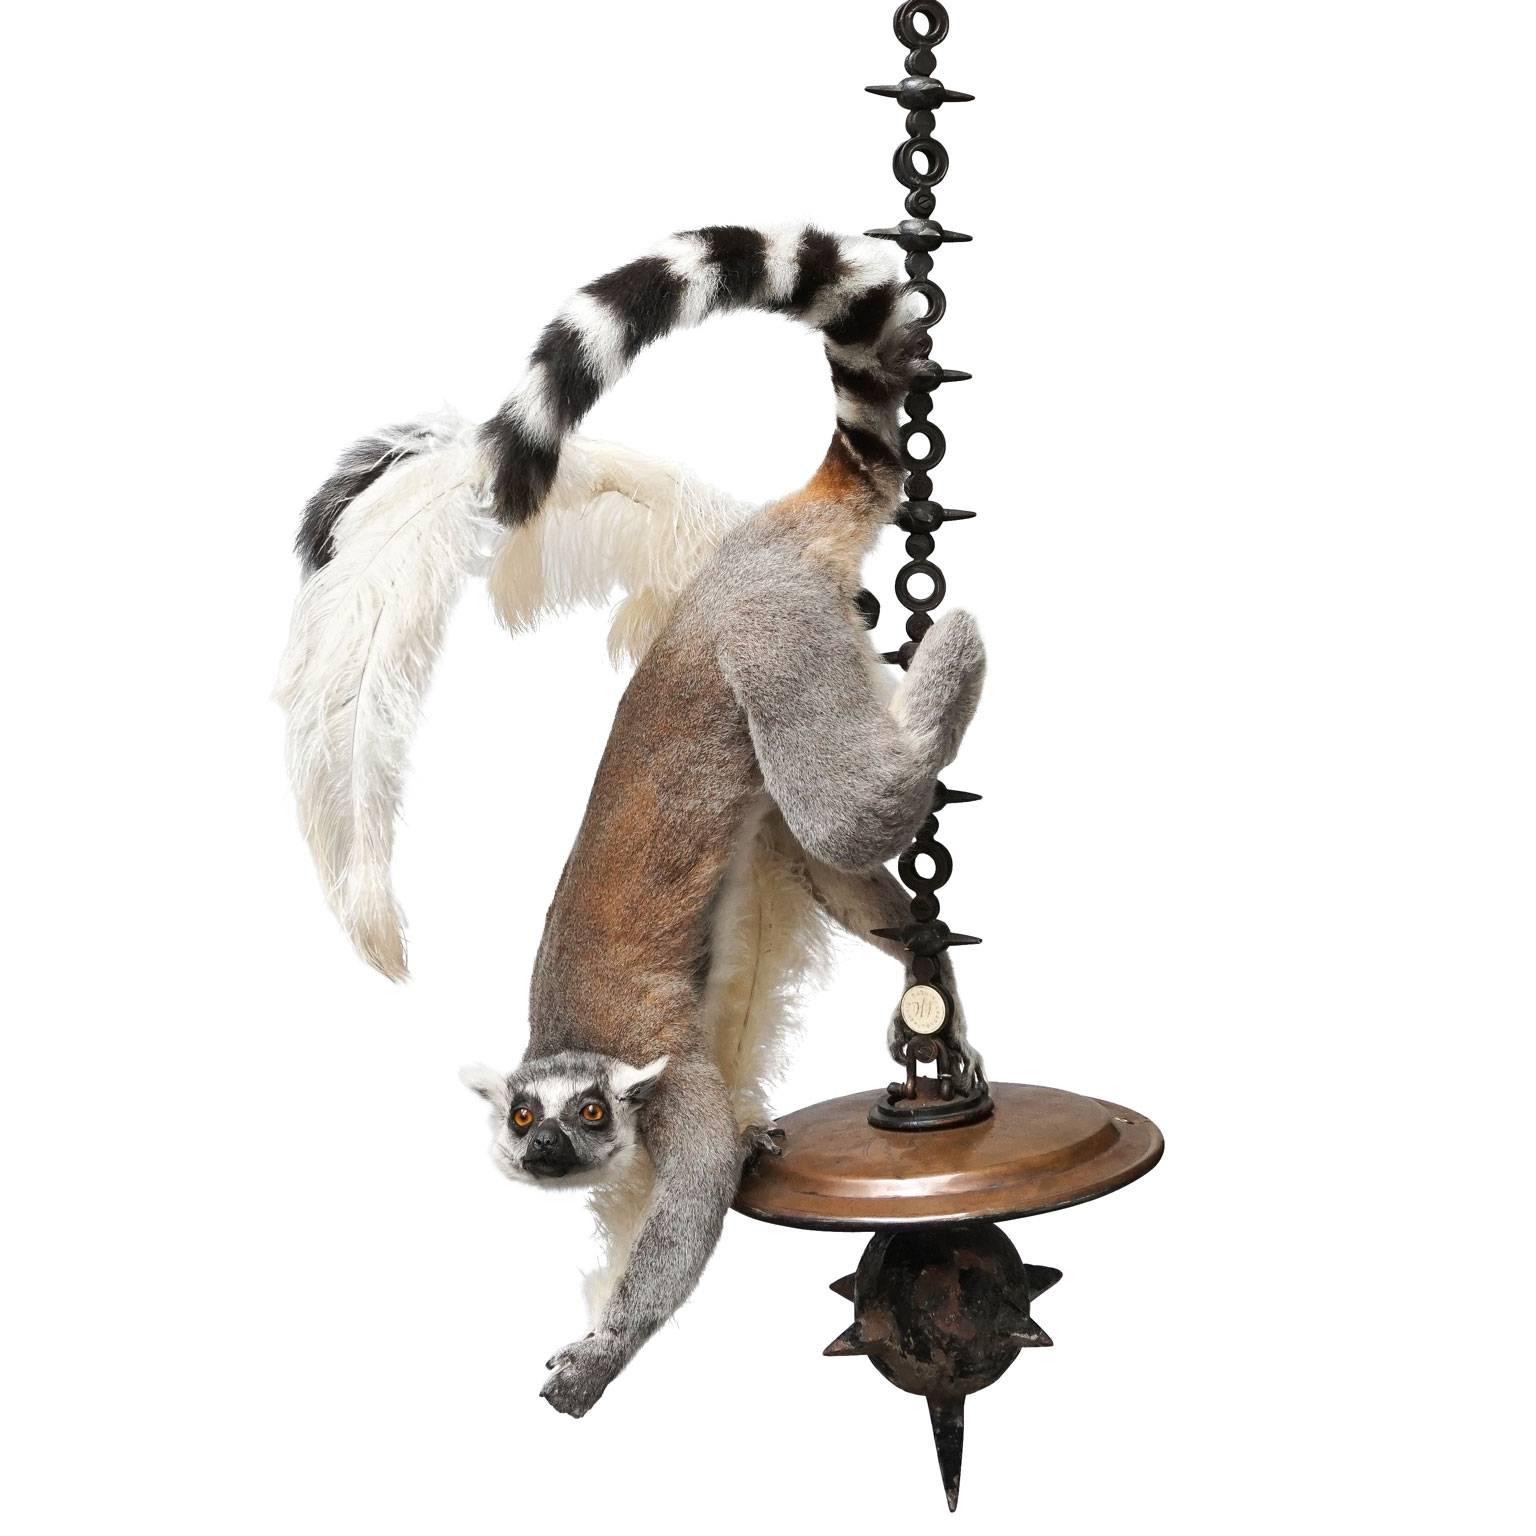 This Lemur catta is hanging from a bespoke chain. Balancing on a copper disc holding a string of ostrich feathers. Length of the chain is variable.

Note: None of our animals have been taken from the wild and all animals have died of natural